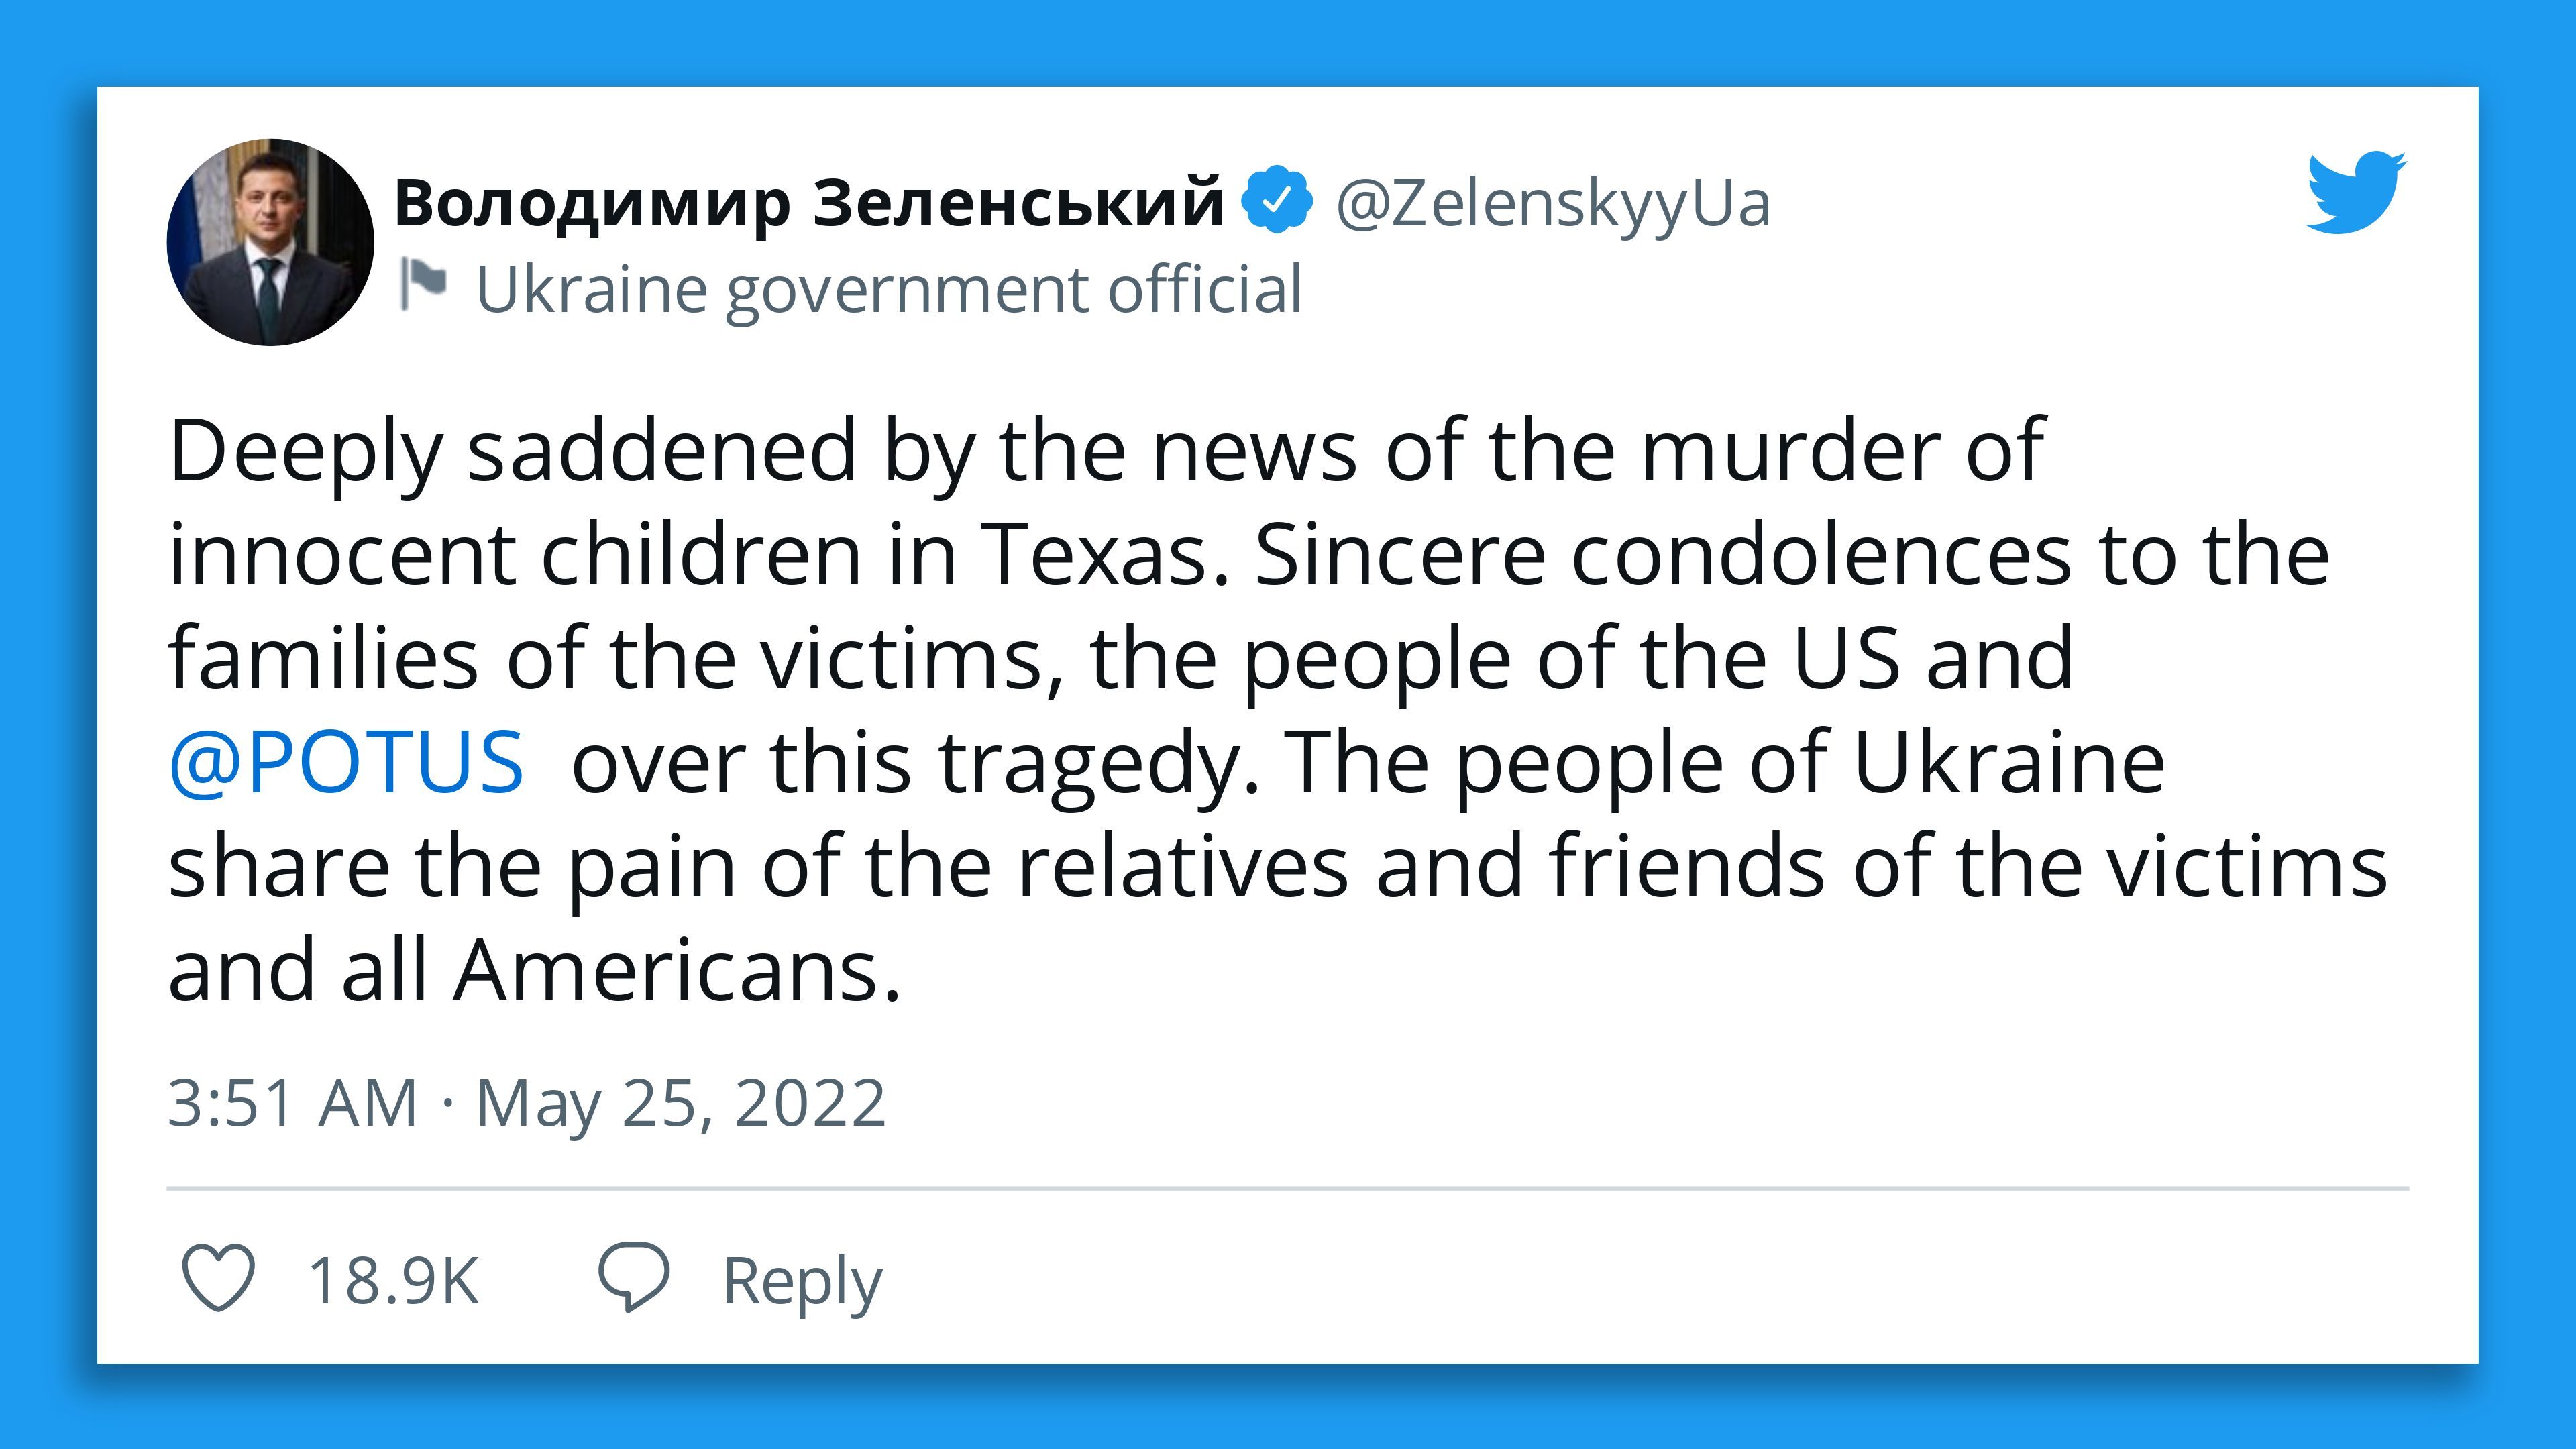 A screenshot of Ukrainian President Volodymyr Zelensky's tweet offering condolences to families of the victims of Tuesday's Texas school shooting.